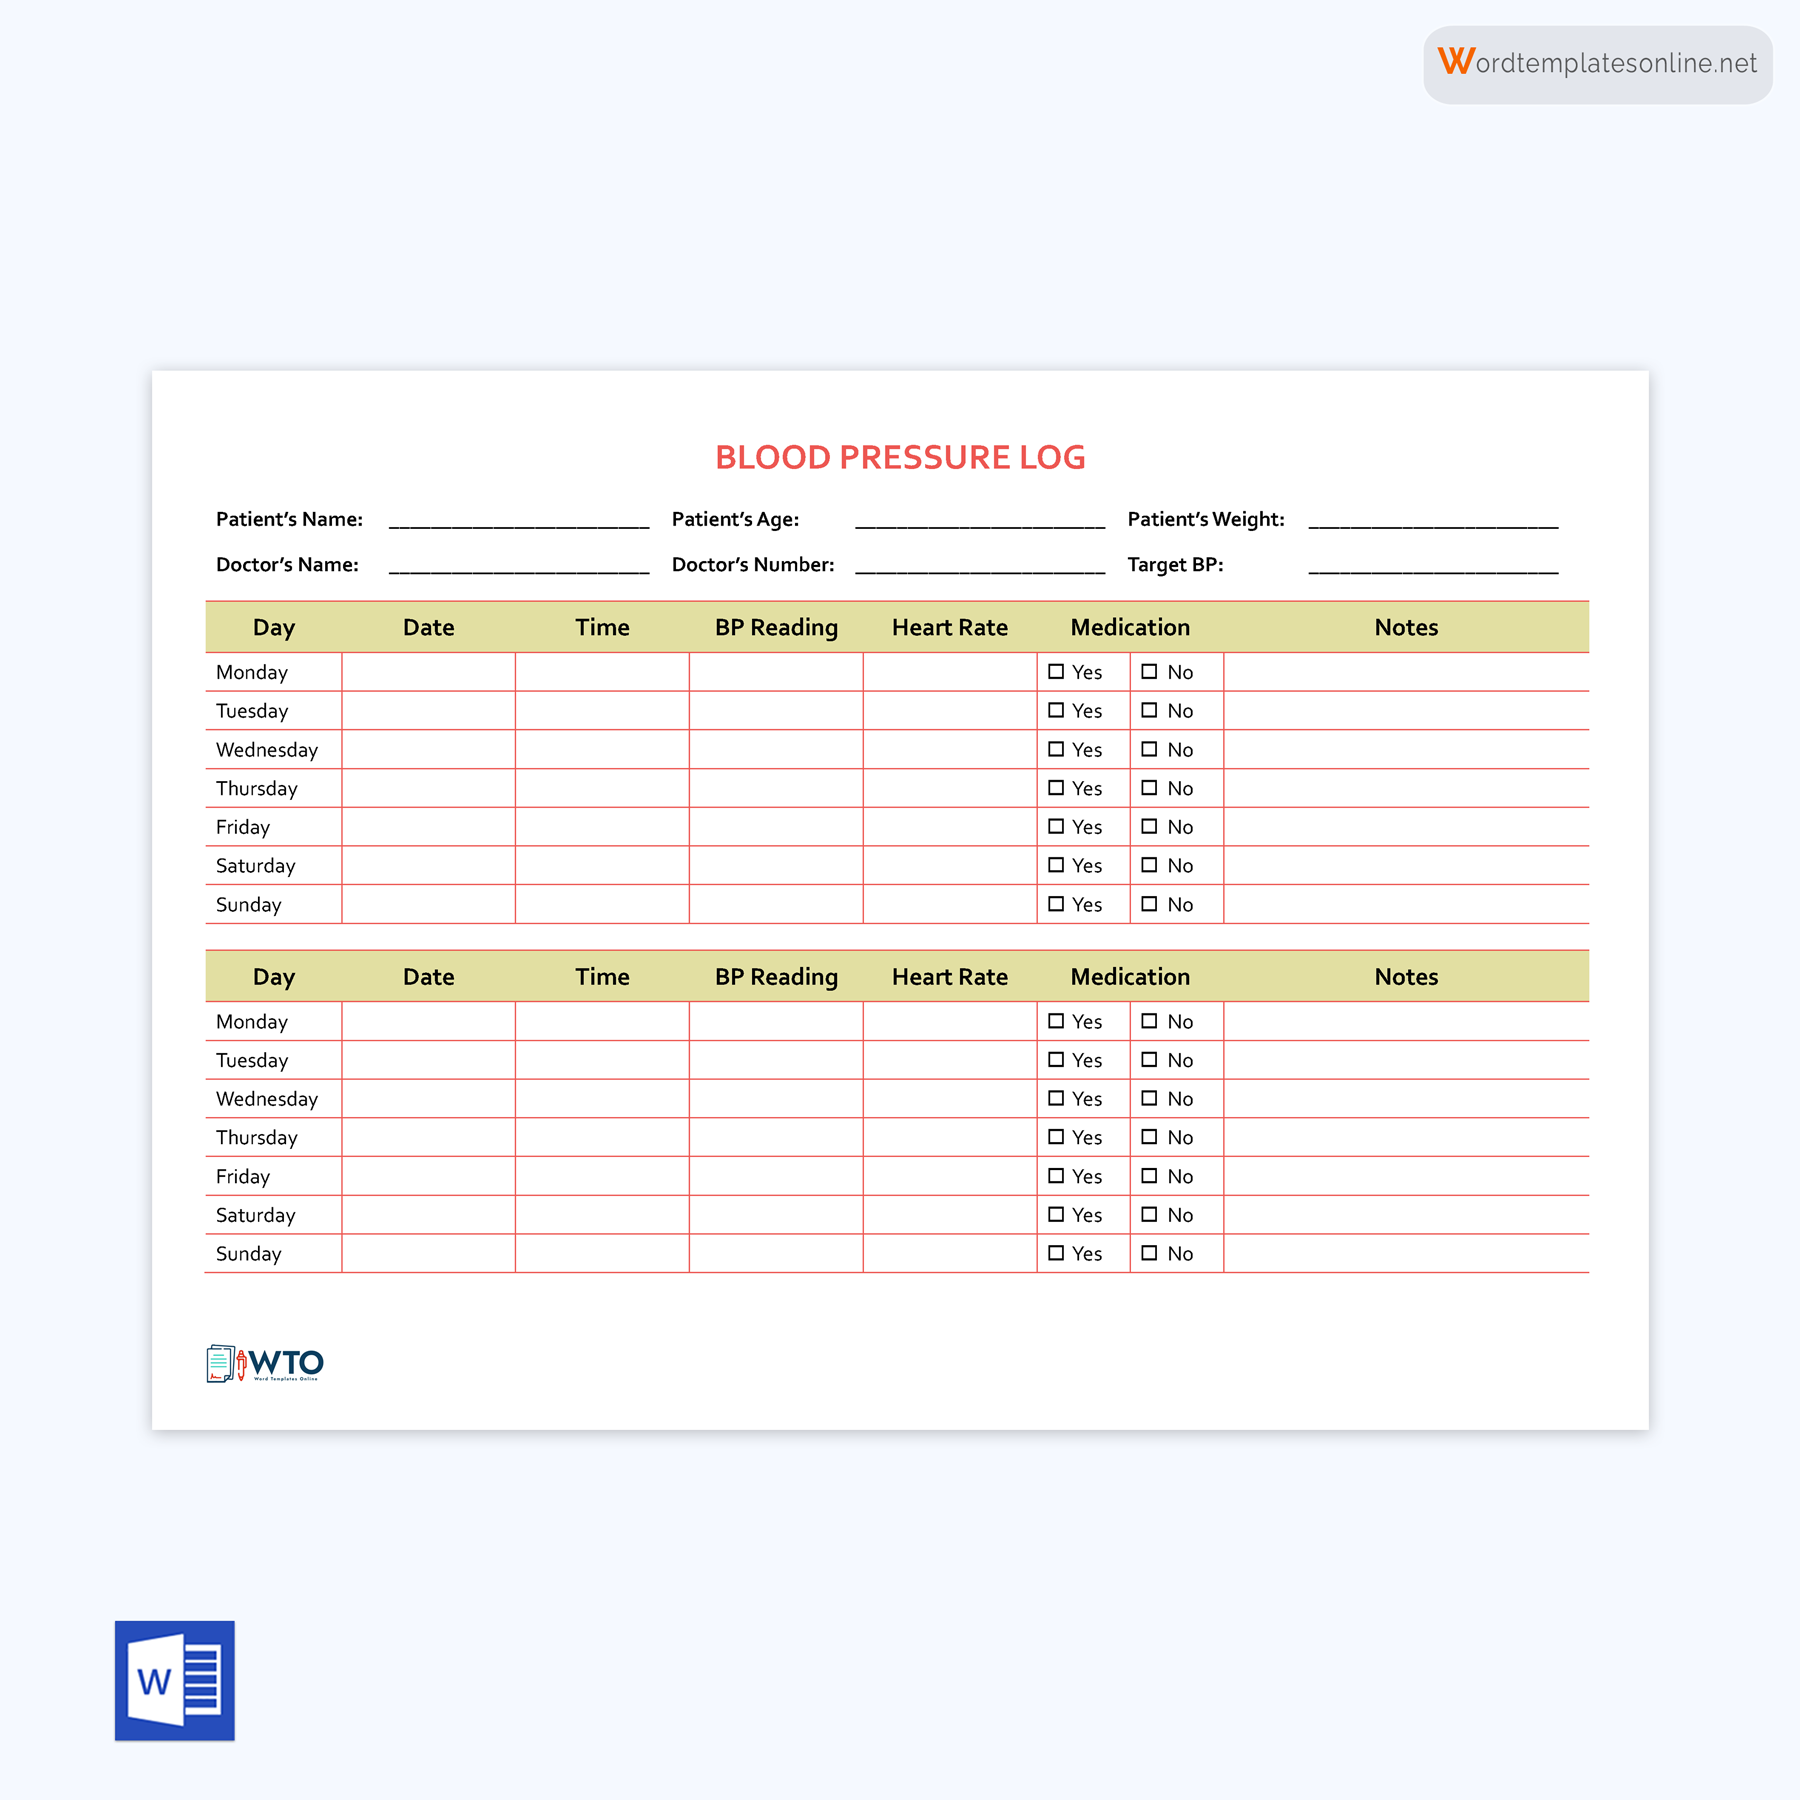 Monitor Your Health with Our Blood Pressure Log Template